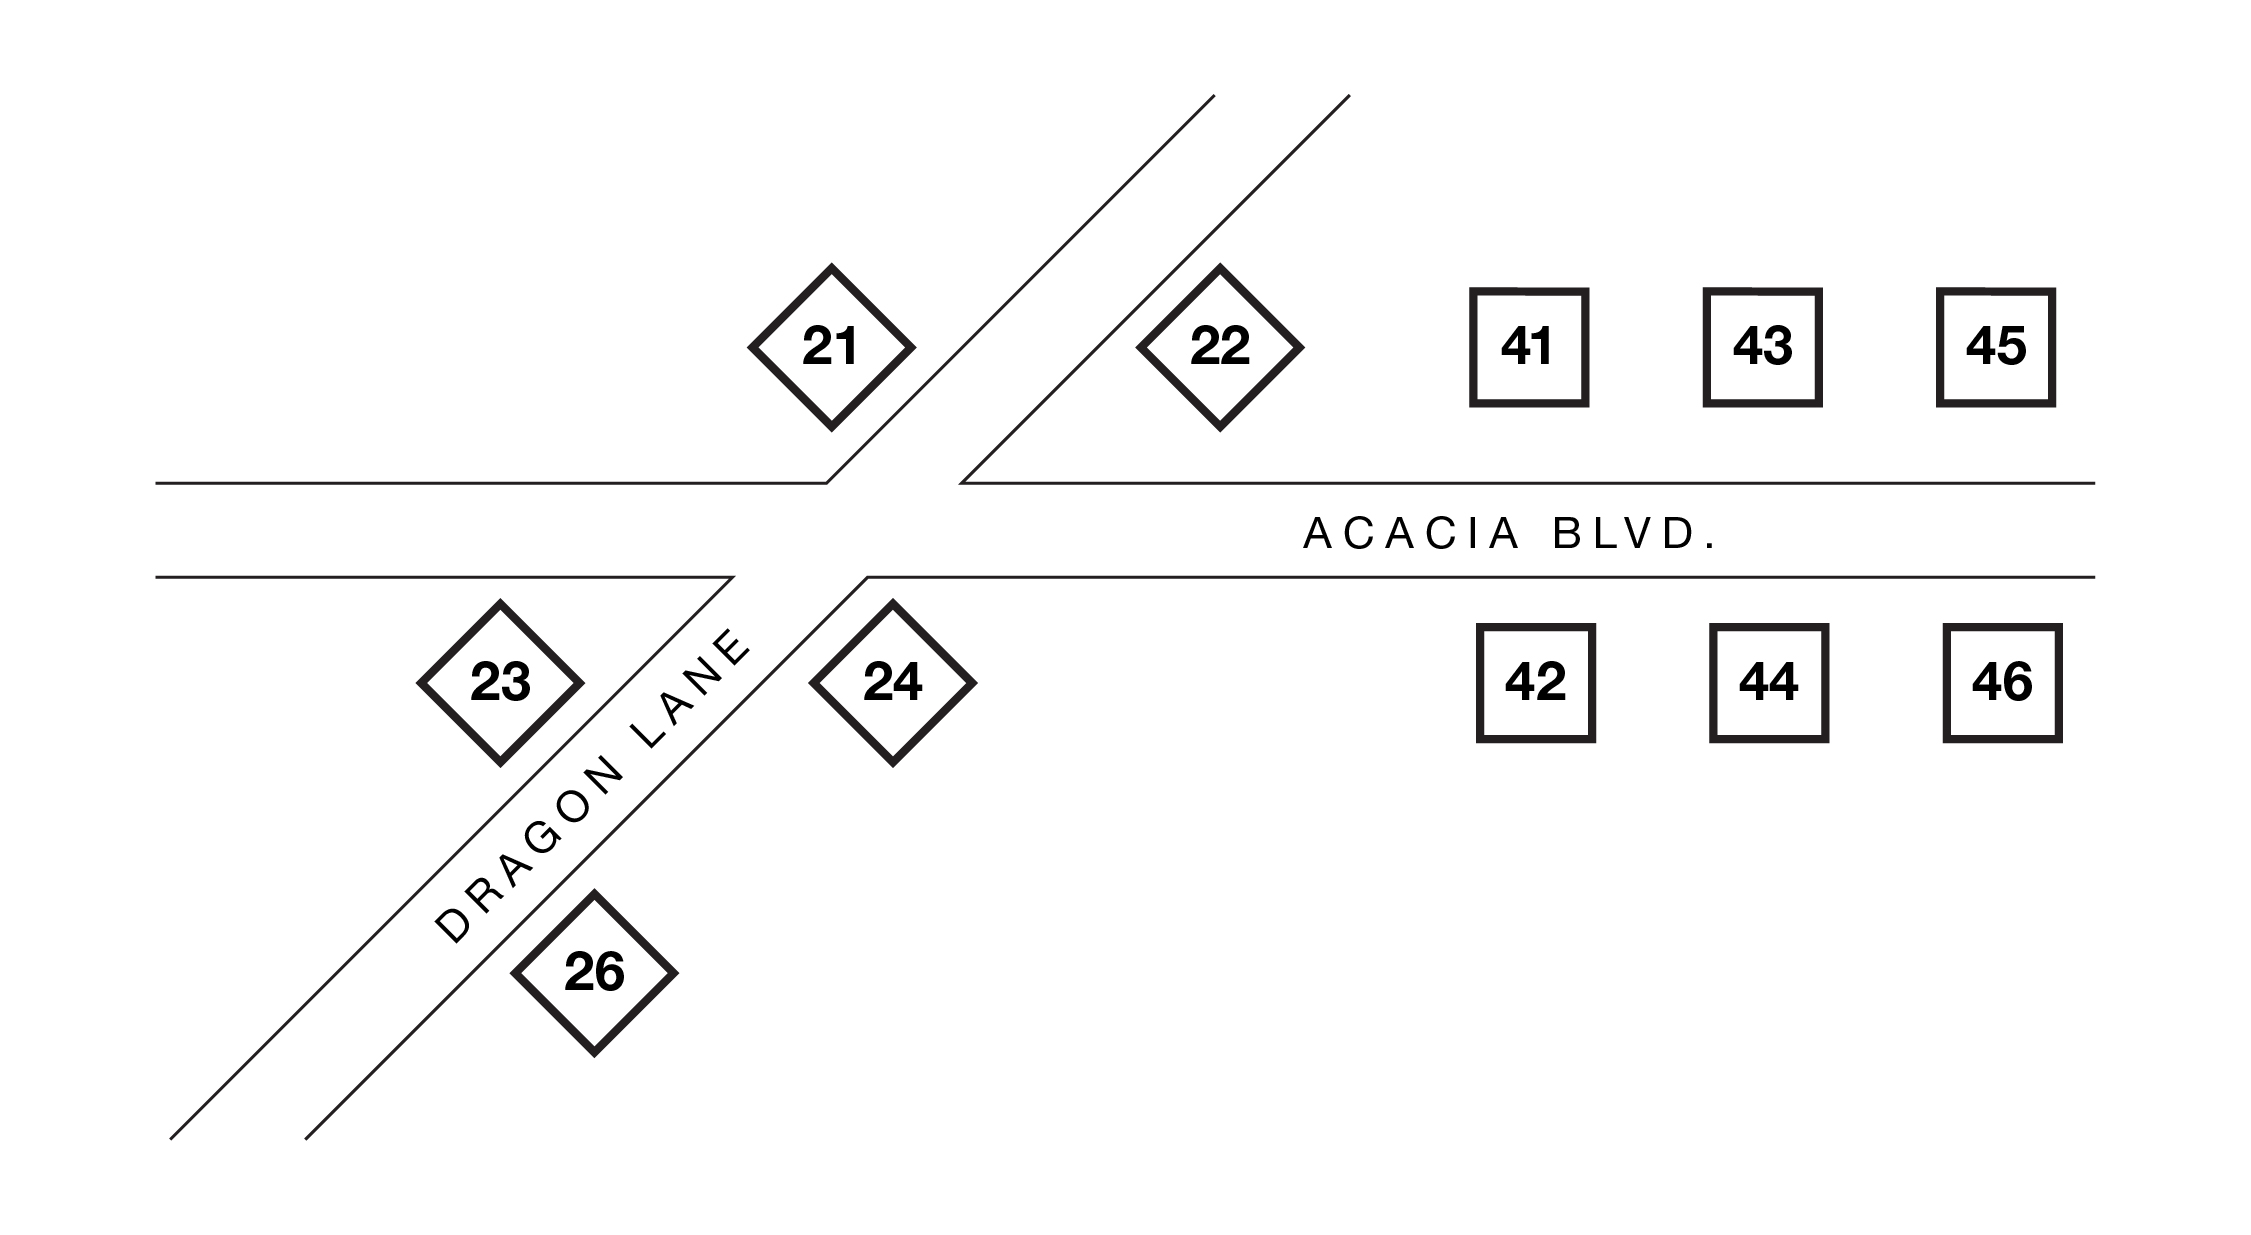 Image showing layout of streets and houses in Bigbys Landing